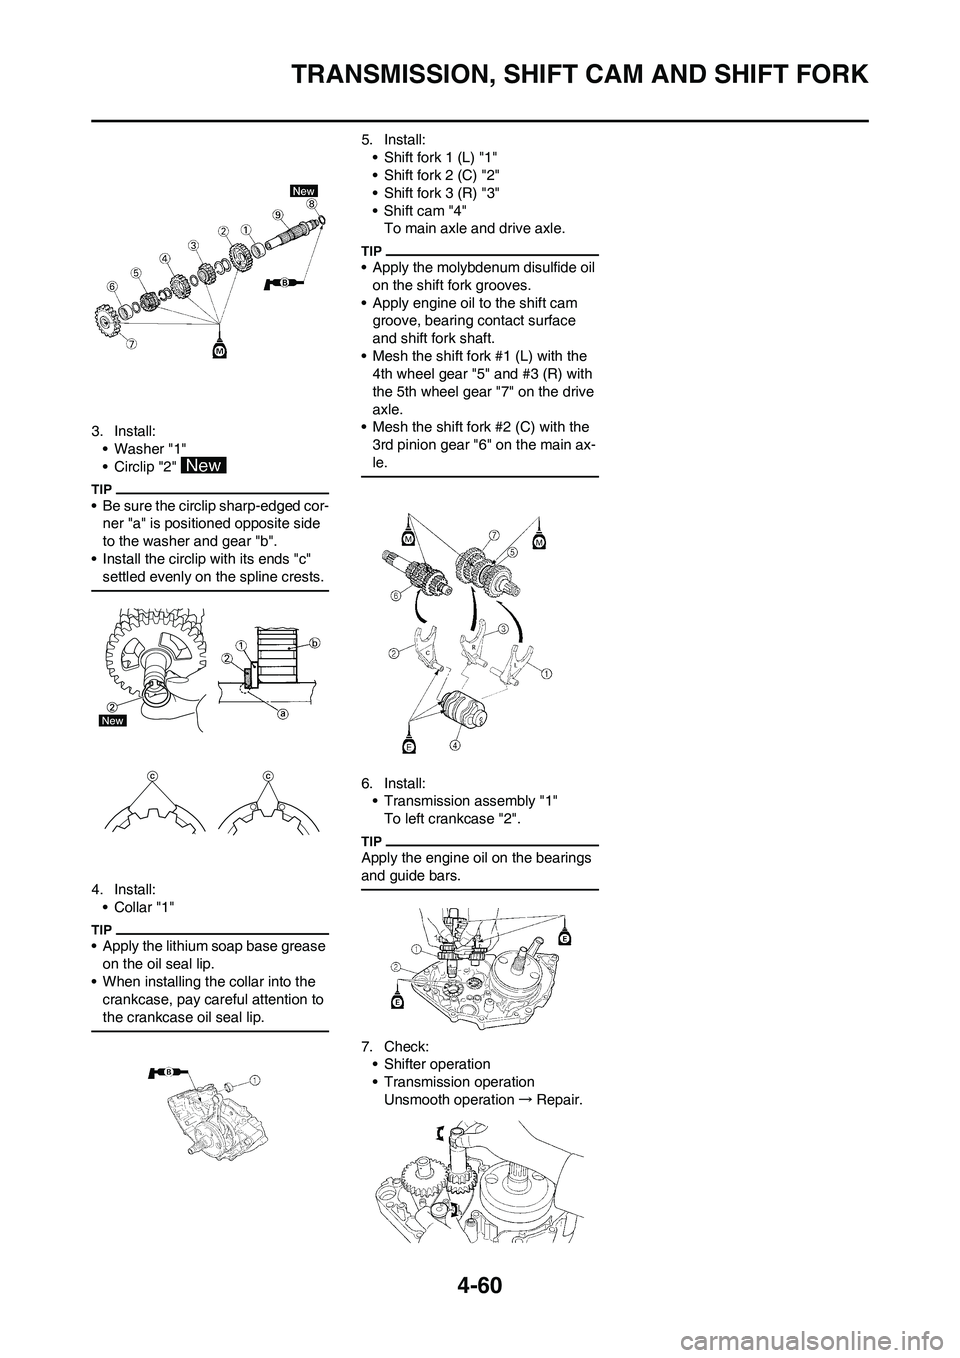 YAMAHA YZ450F 2011  Owners Manual 4-60
TRANSMISSION, SHIFT CAM AND SHIFT FORK
3. Install:
• Washer "1"
• Circlip "2" 
• Be sure the circlip sharp-edged cor-
ner "a" is positioned opposite side 
to the washer and gear "b".
• In